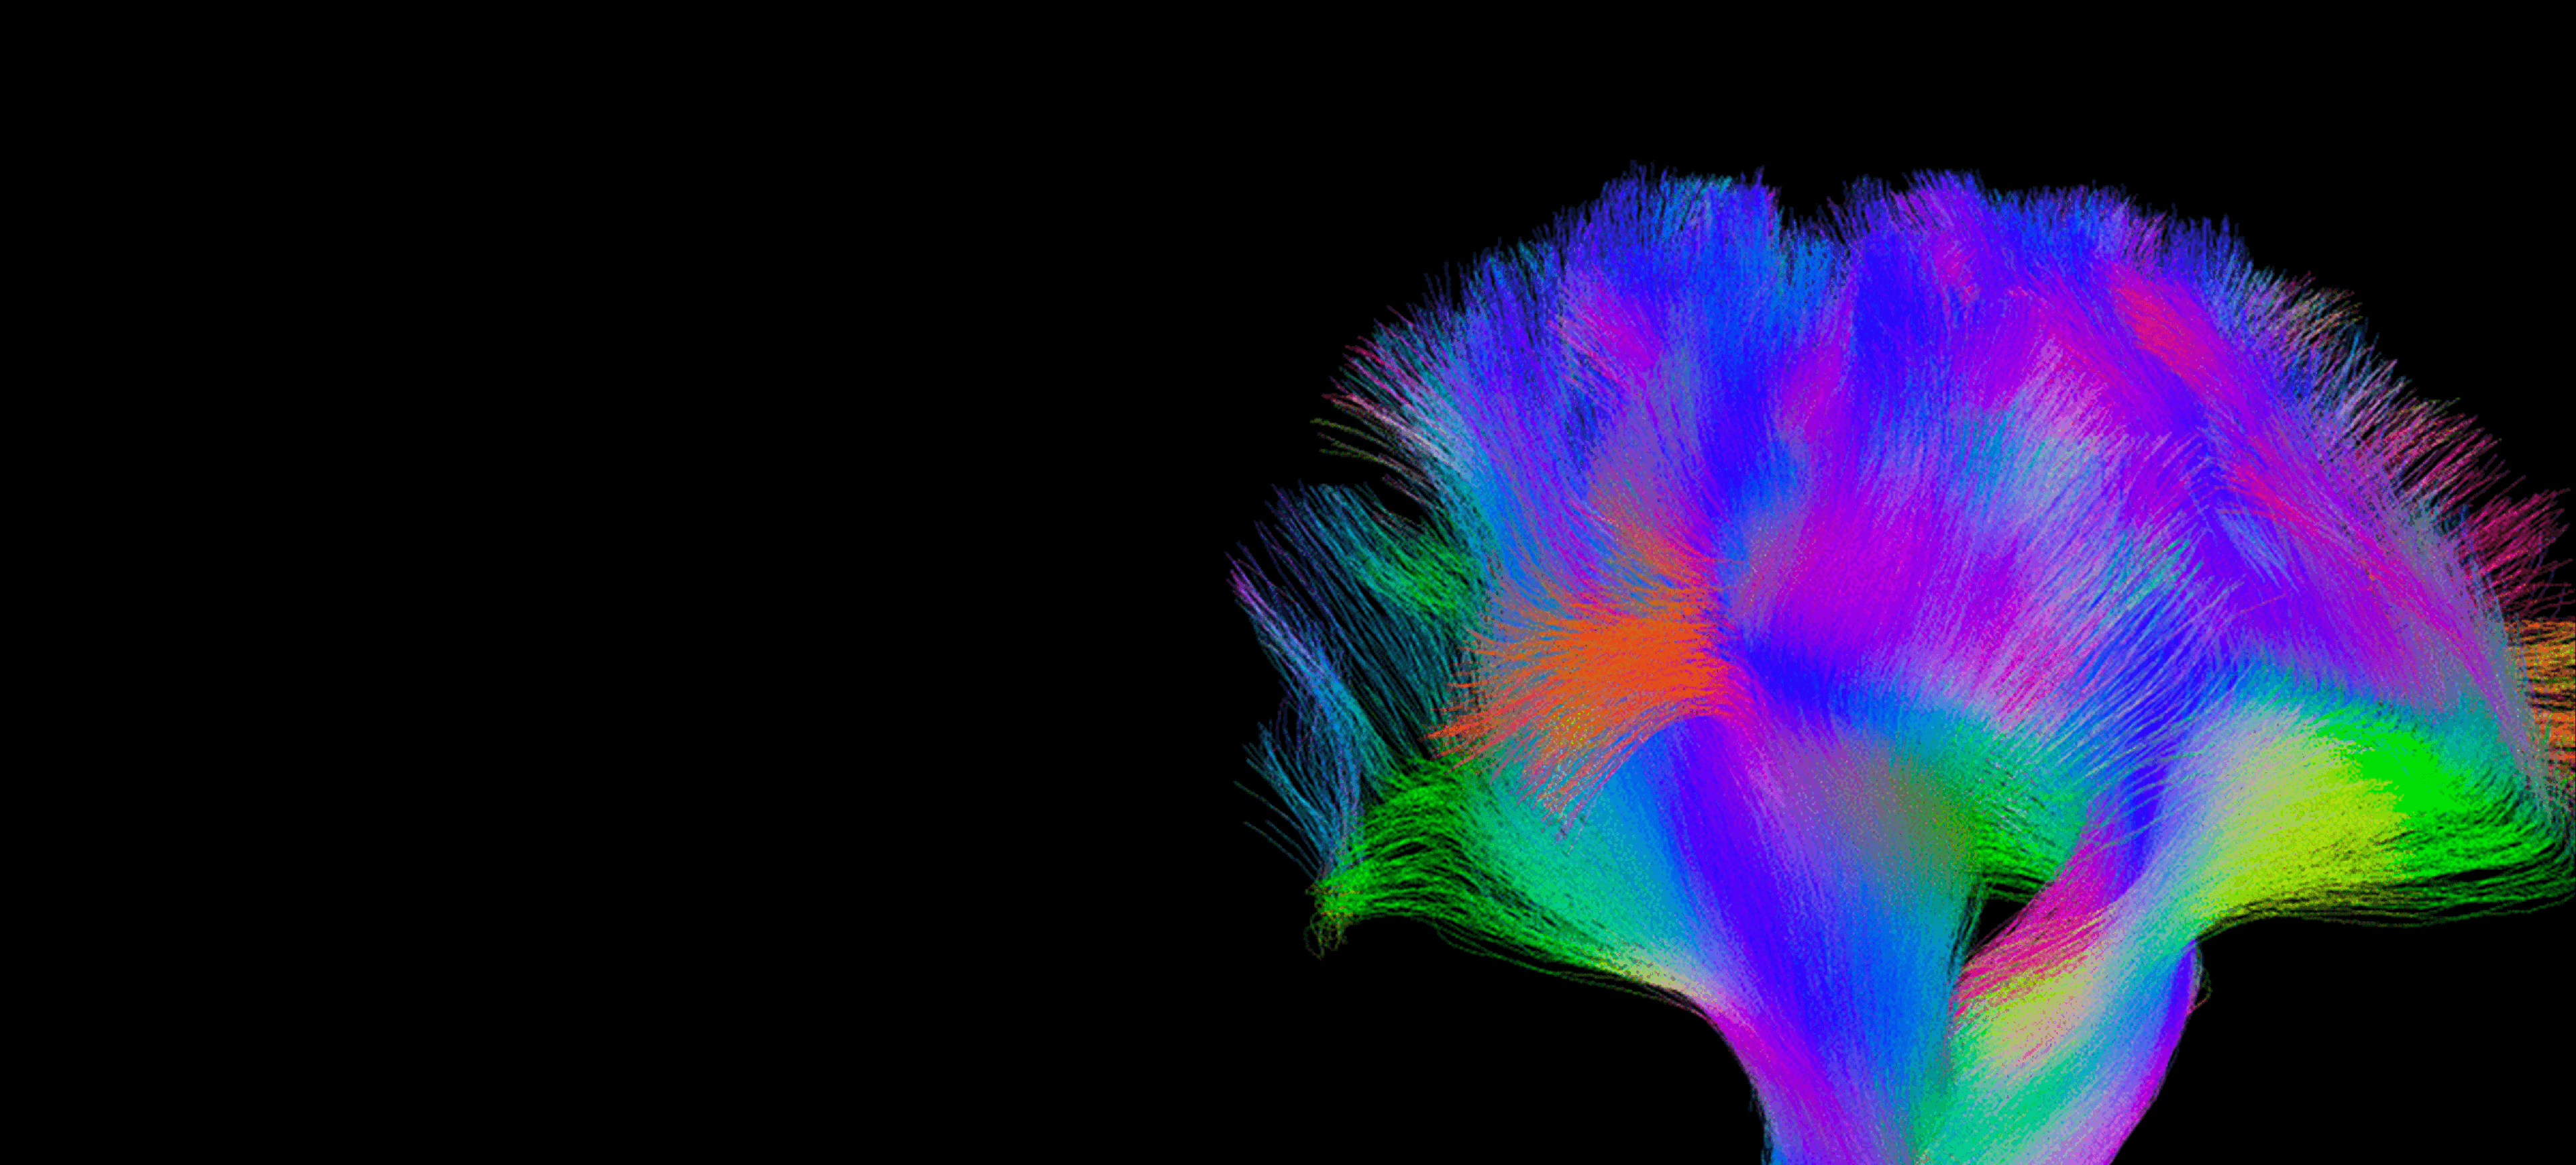 Multicolored image of the neural connections within a brain